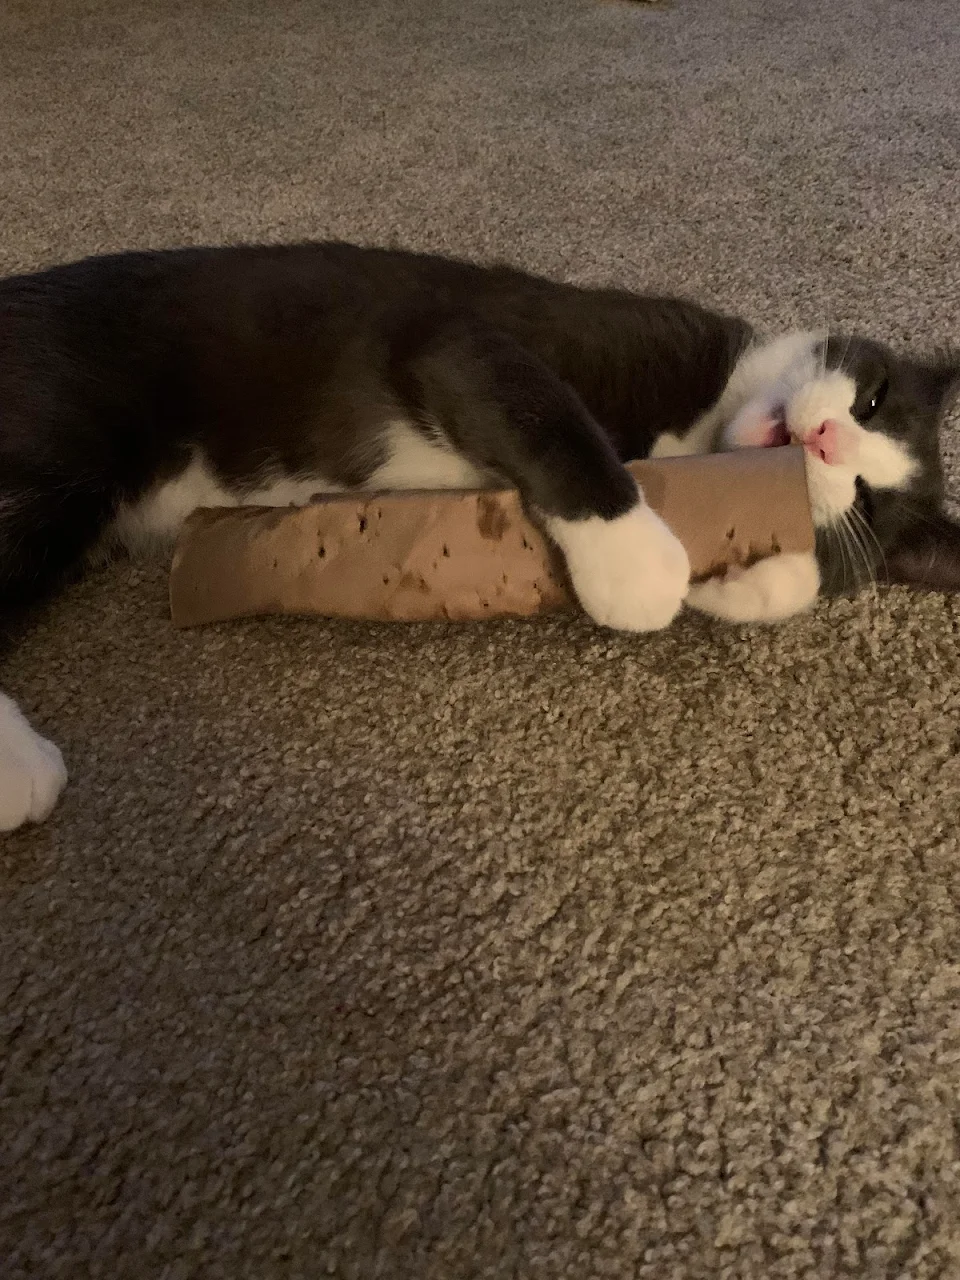 Jackson has a thing about cardboard, especially tubes